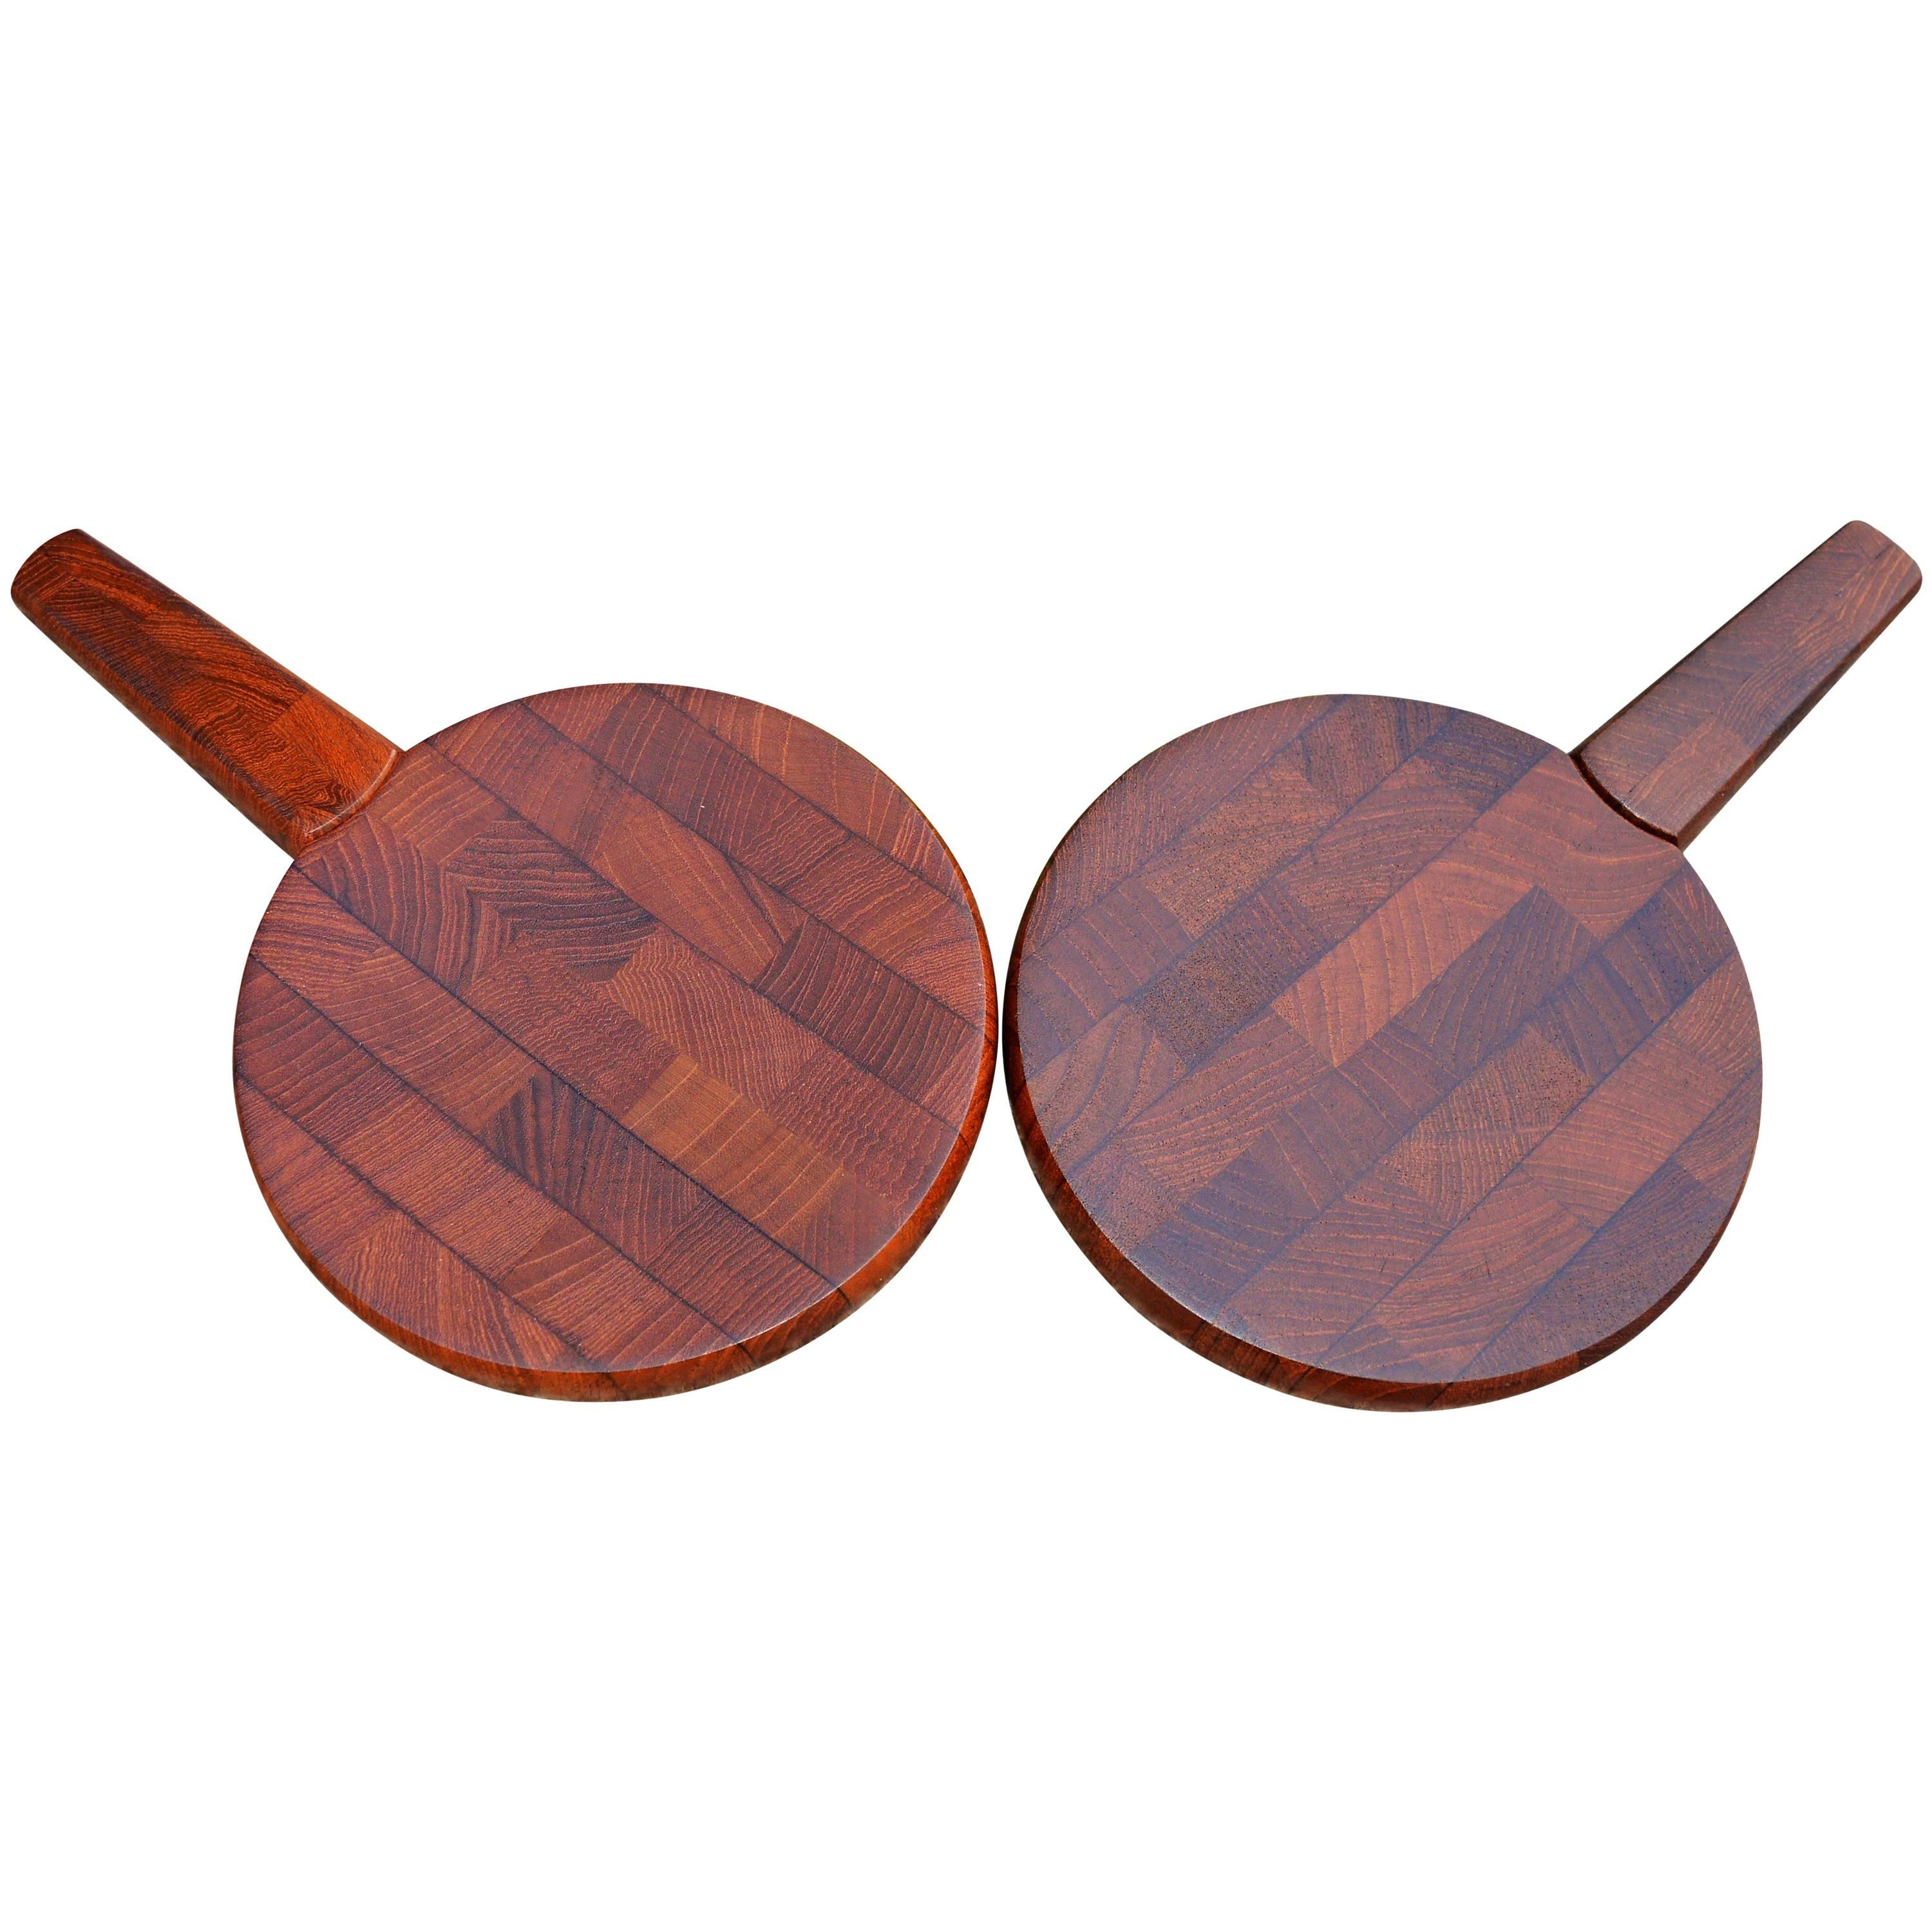 Pair of Jens Quistgaard for Dansk Single Teak Cutting Boards with Hidden Knives For Sale